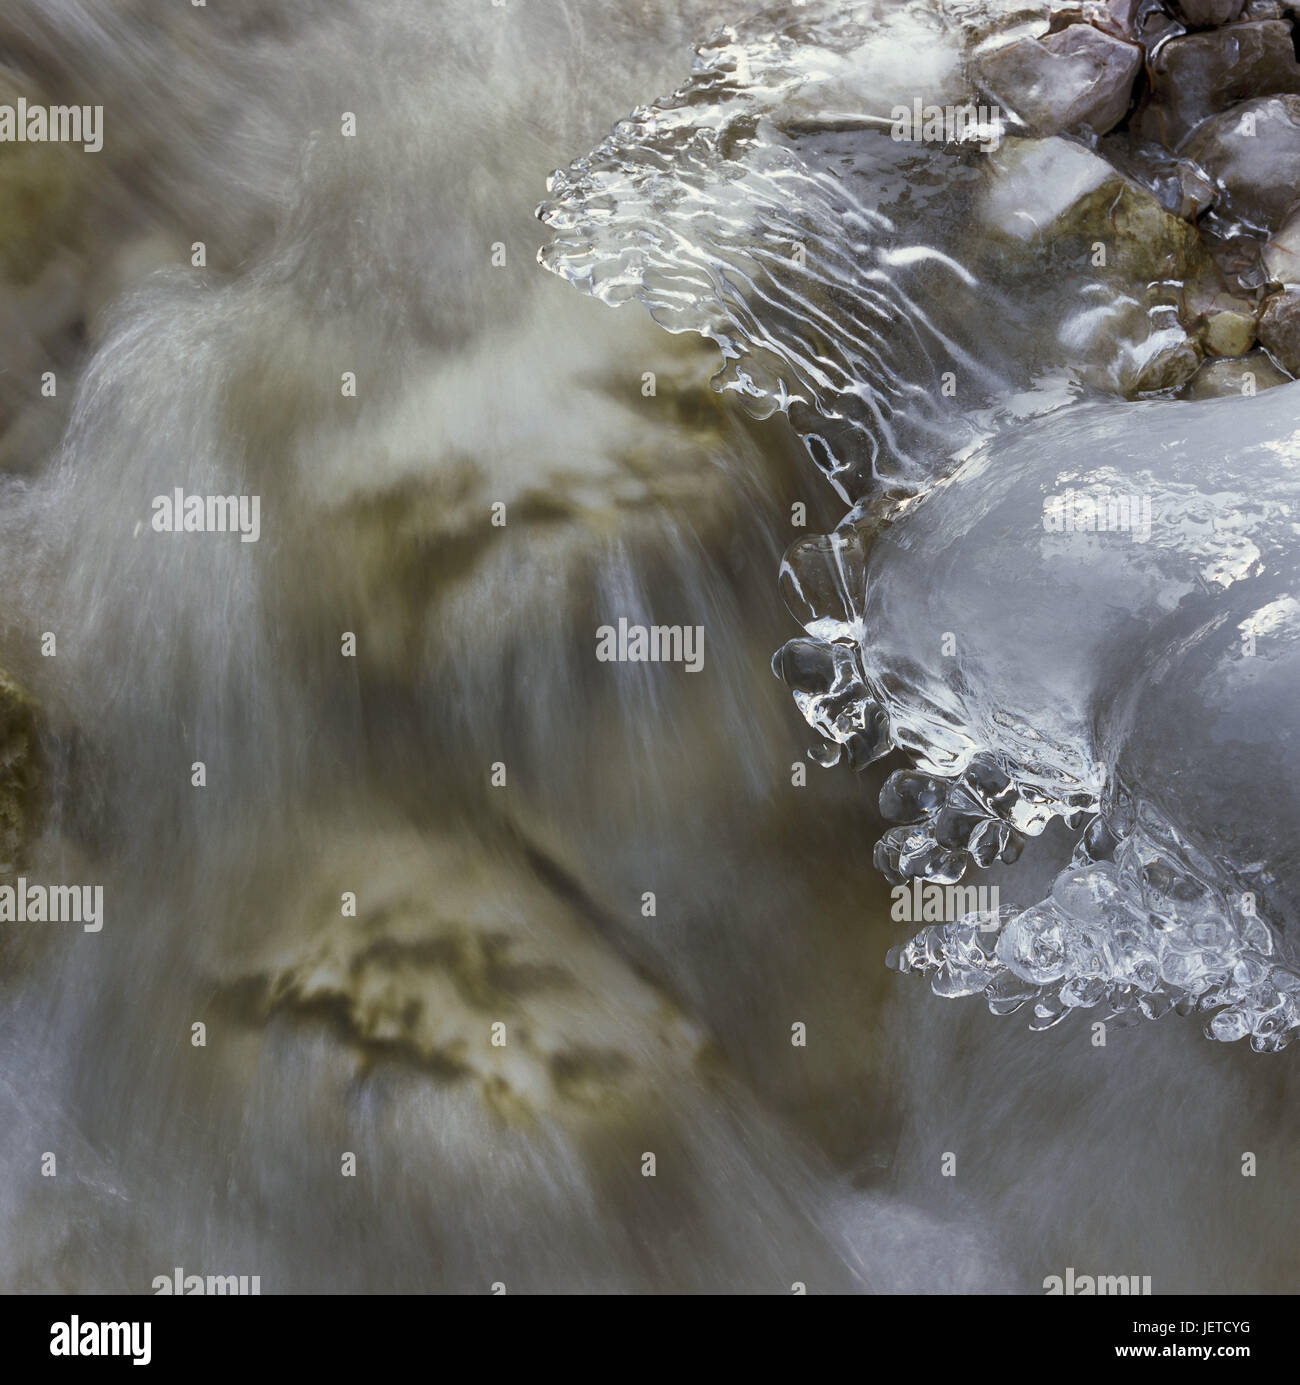 Mountain brook, water, flow, freezes over, waters, brook, river, stones, E sharp, frost, cold, season, nature, icon, clearly, freshly, cleanness, naturalness, winter, Stock Photo